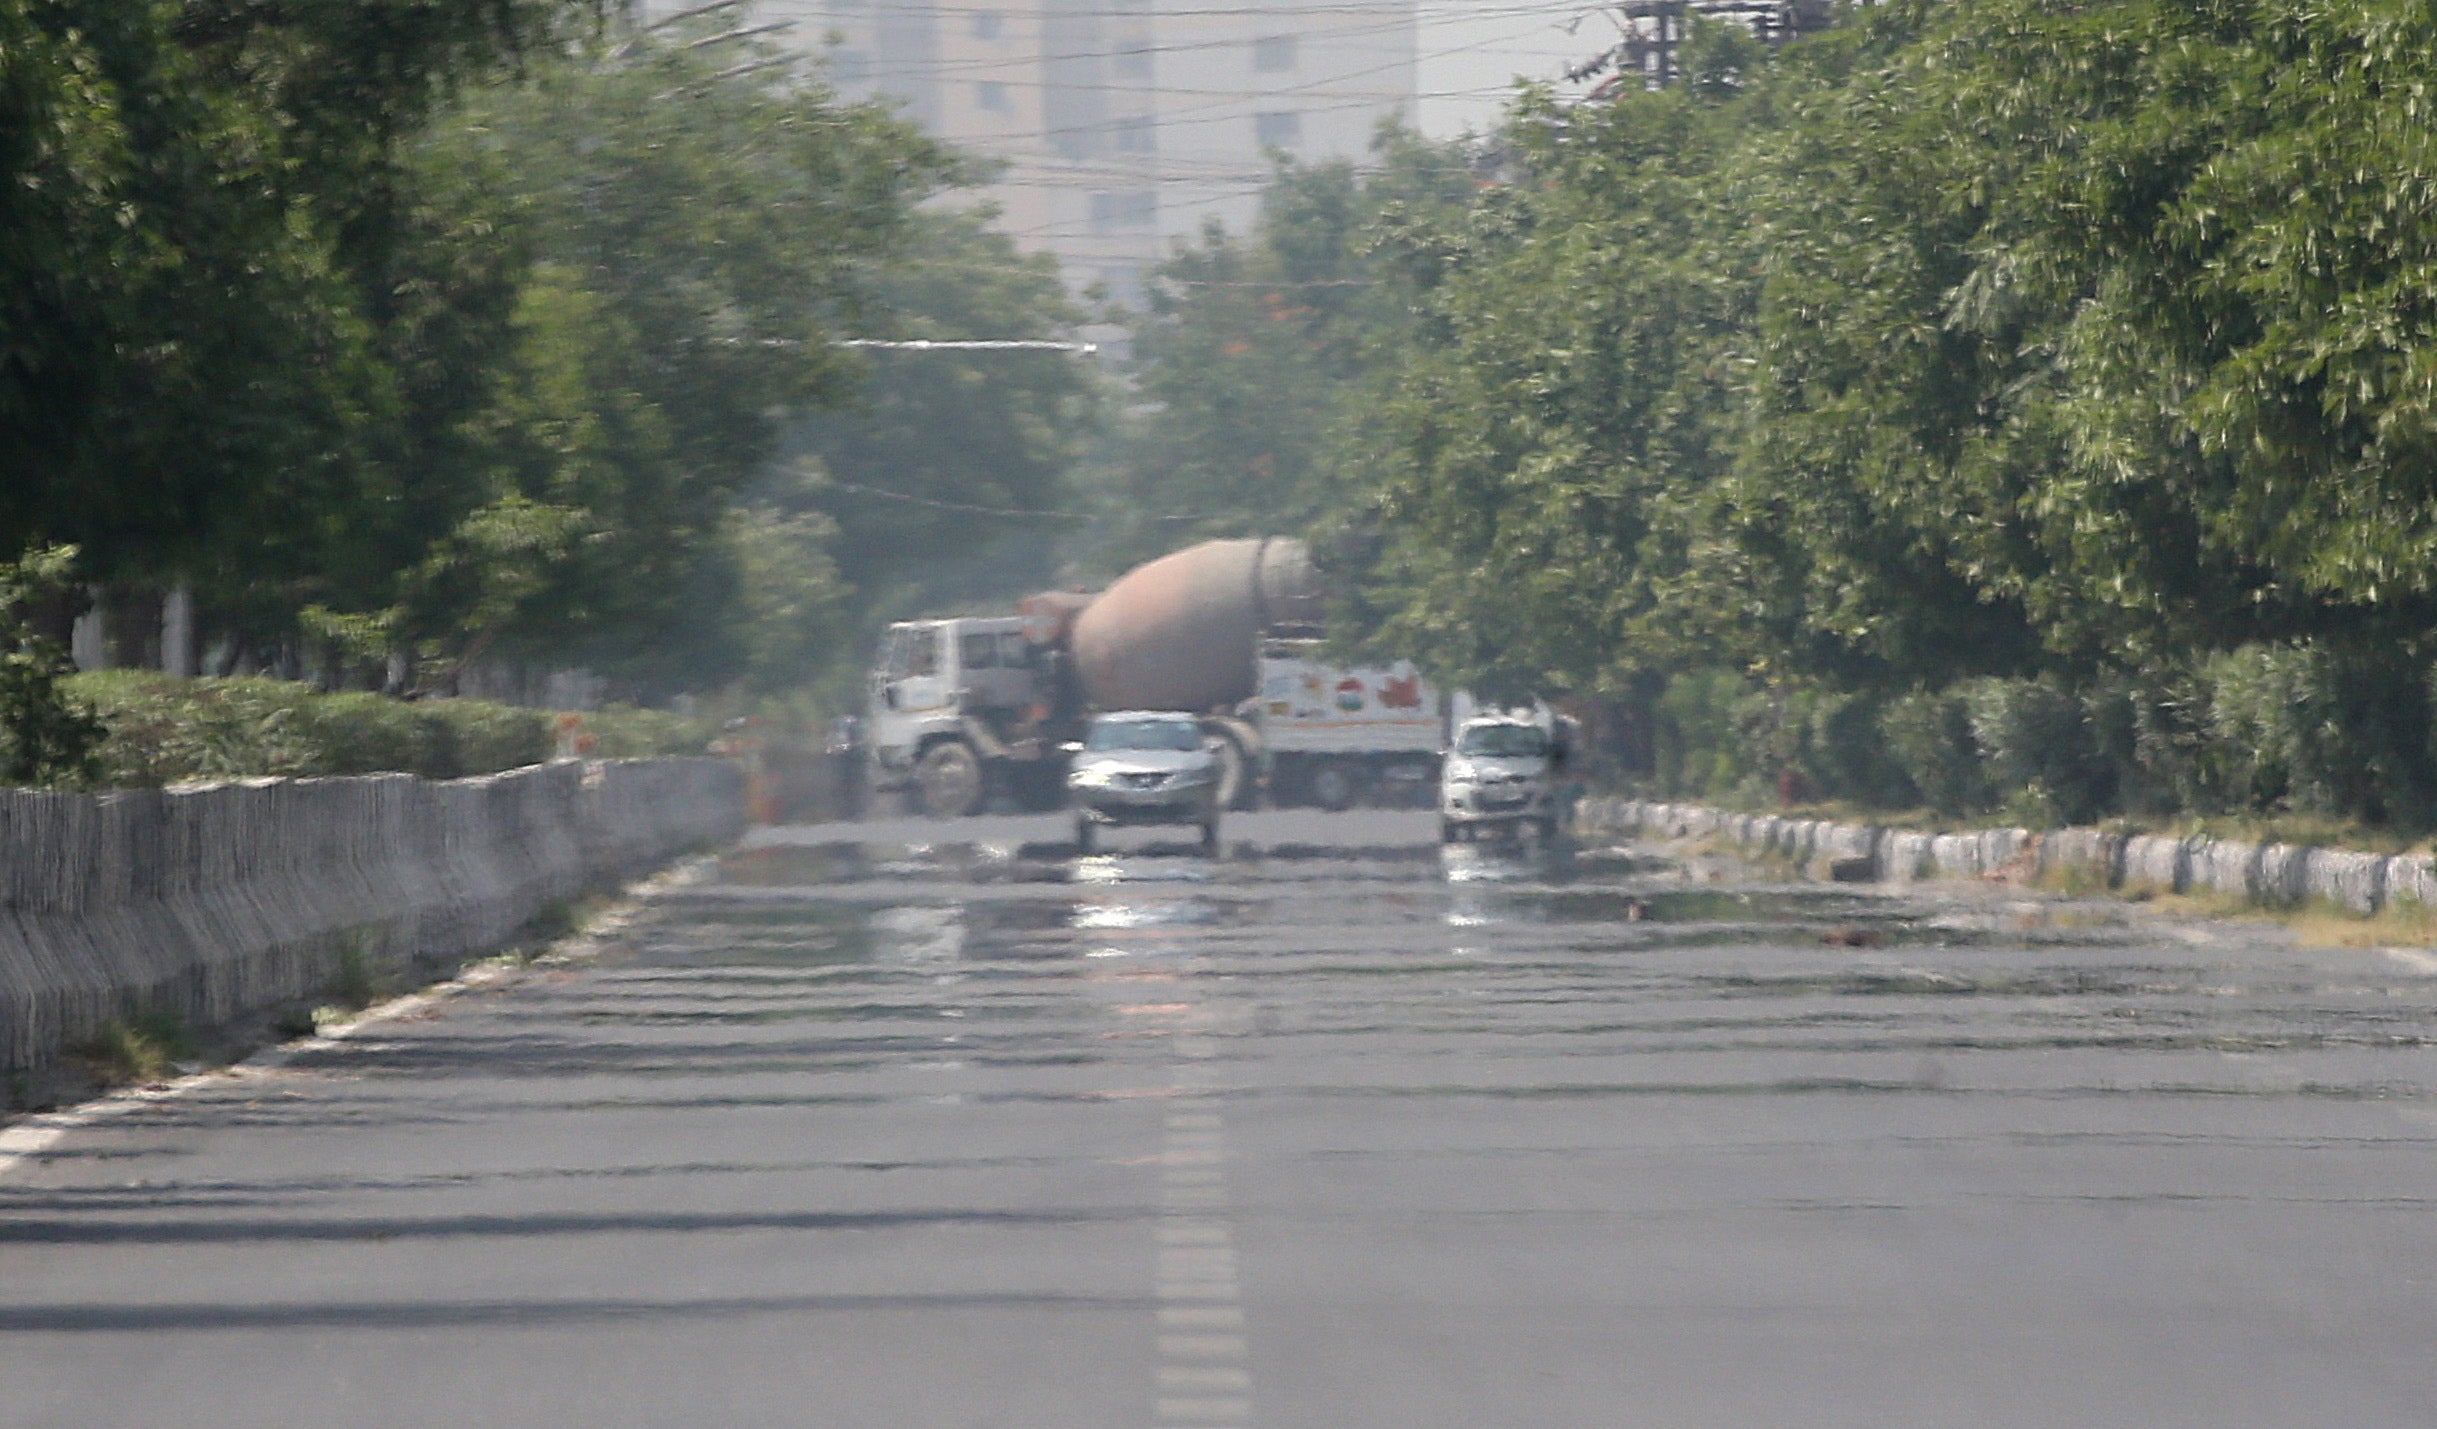 A view of heat haze occurring on the surface of a road near New Delhi, India, 28 April 2022